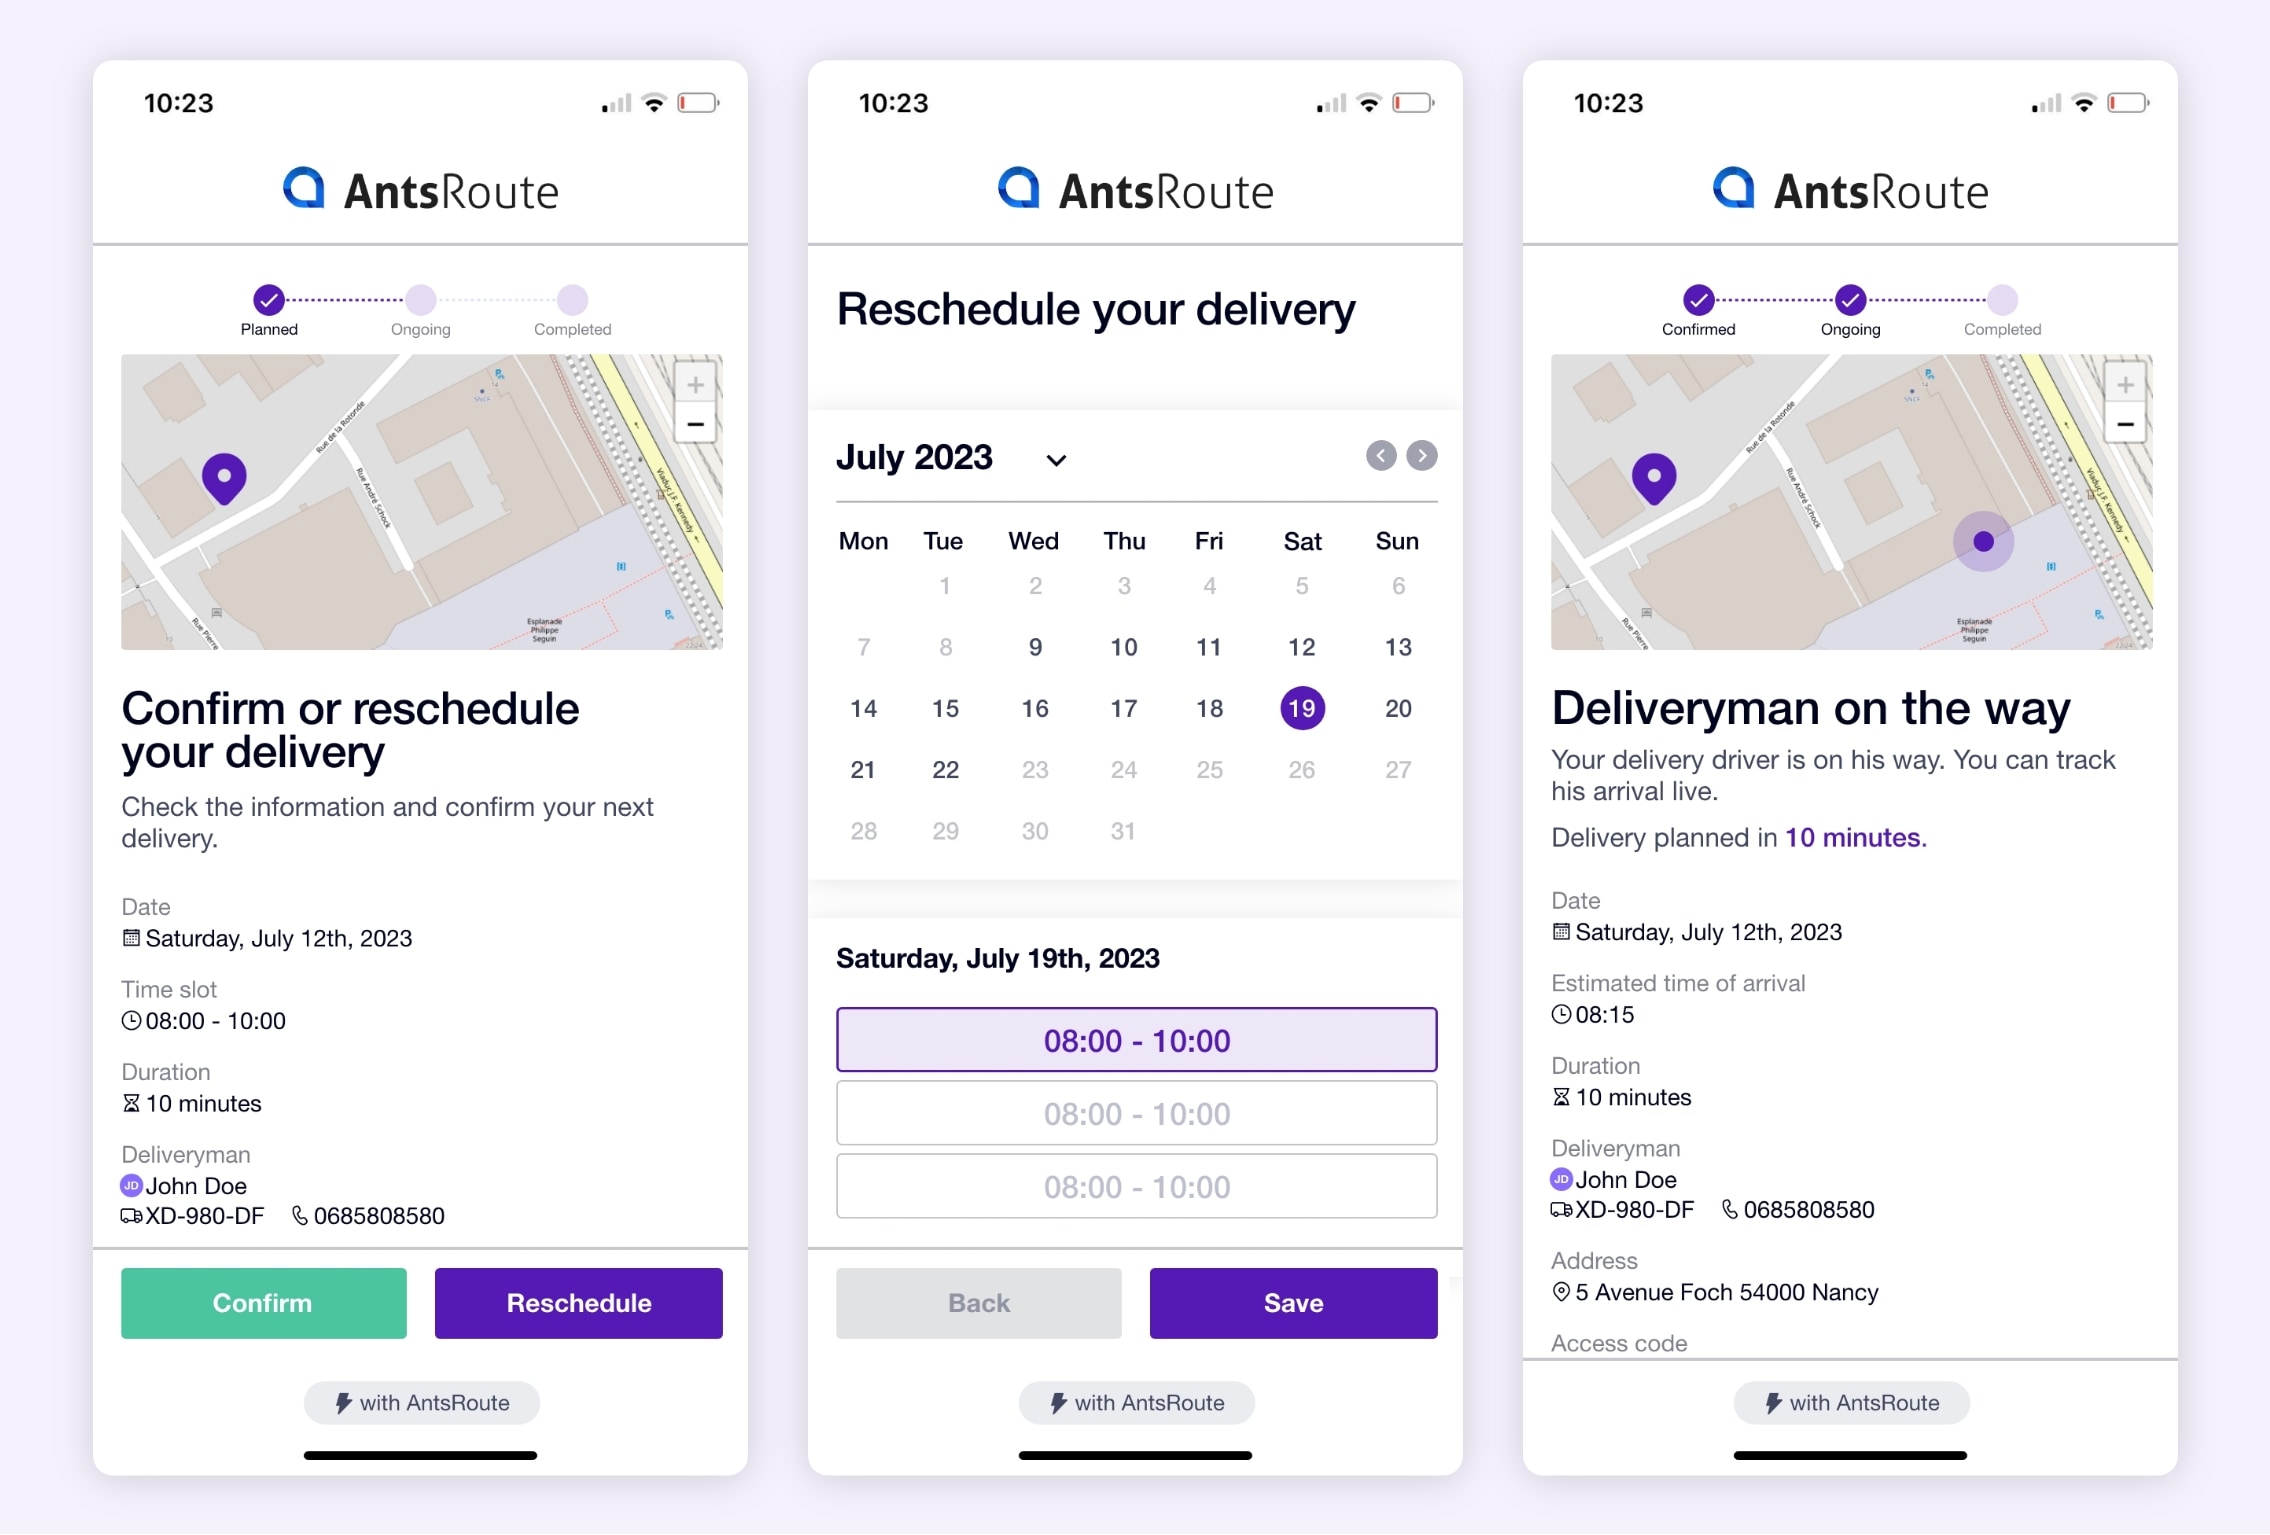 The AntsRoute links for rescheduling a delivery and tracking a driver.